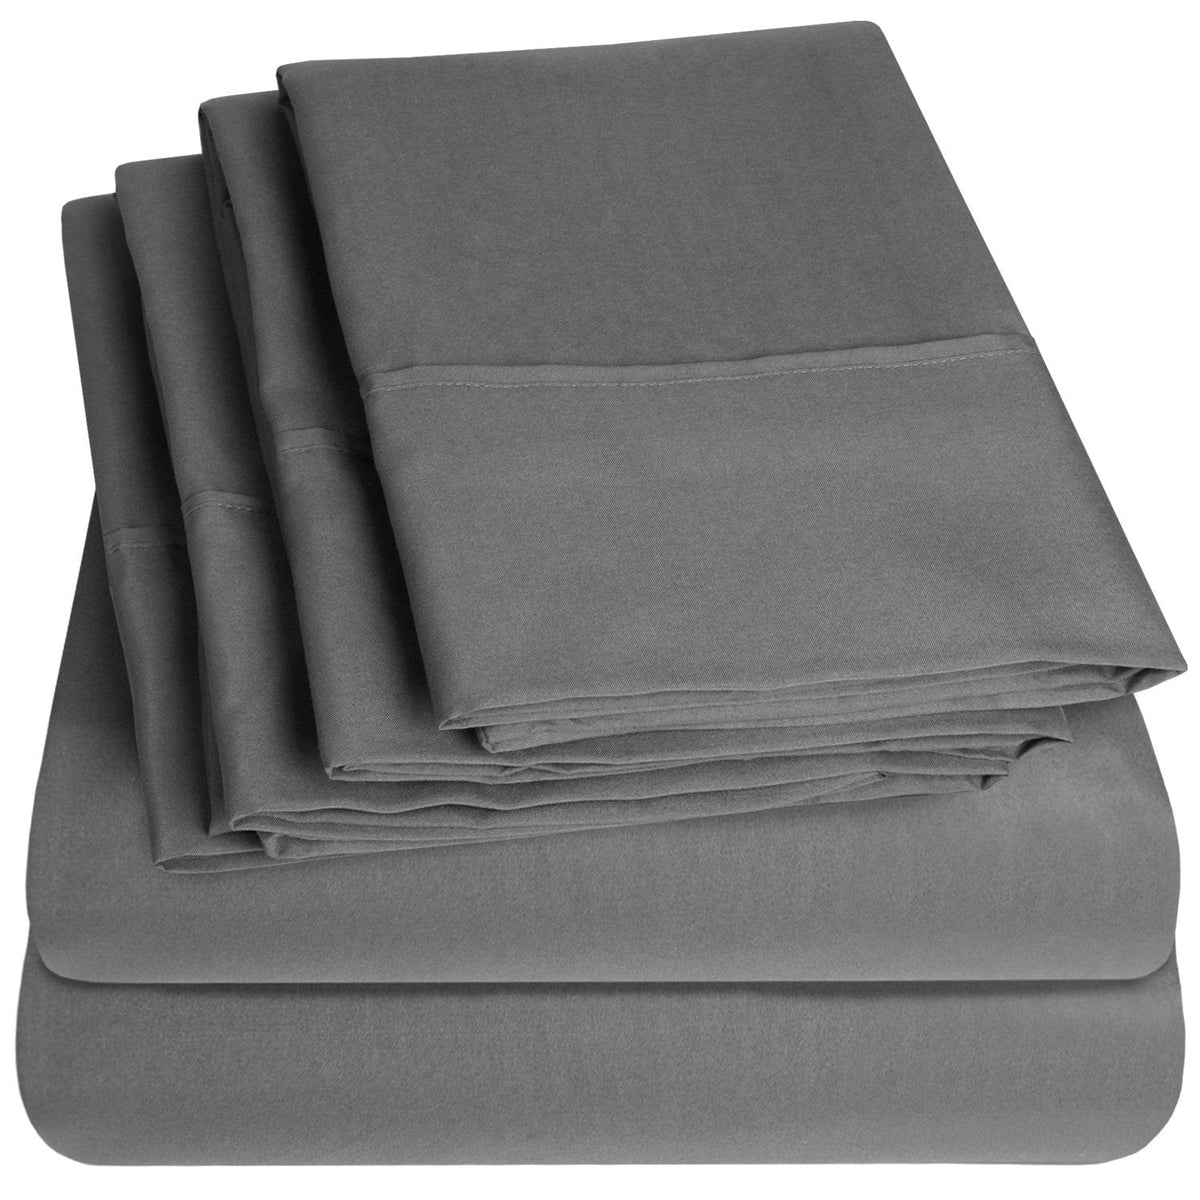 Deluxe 6-Piece Bed Sheet Set (Gray) - Folded